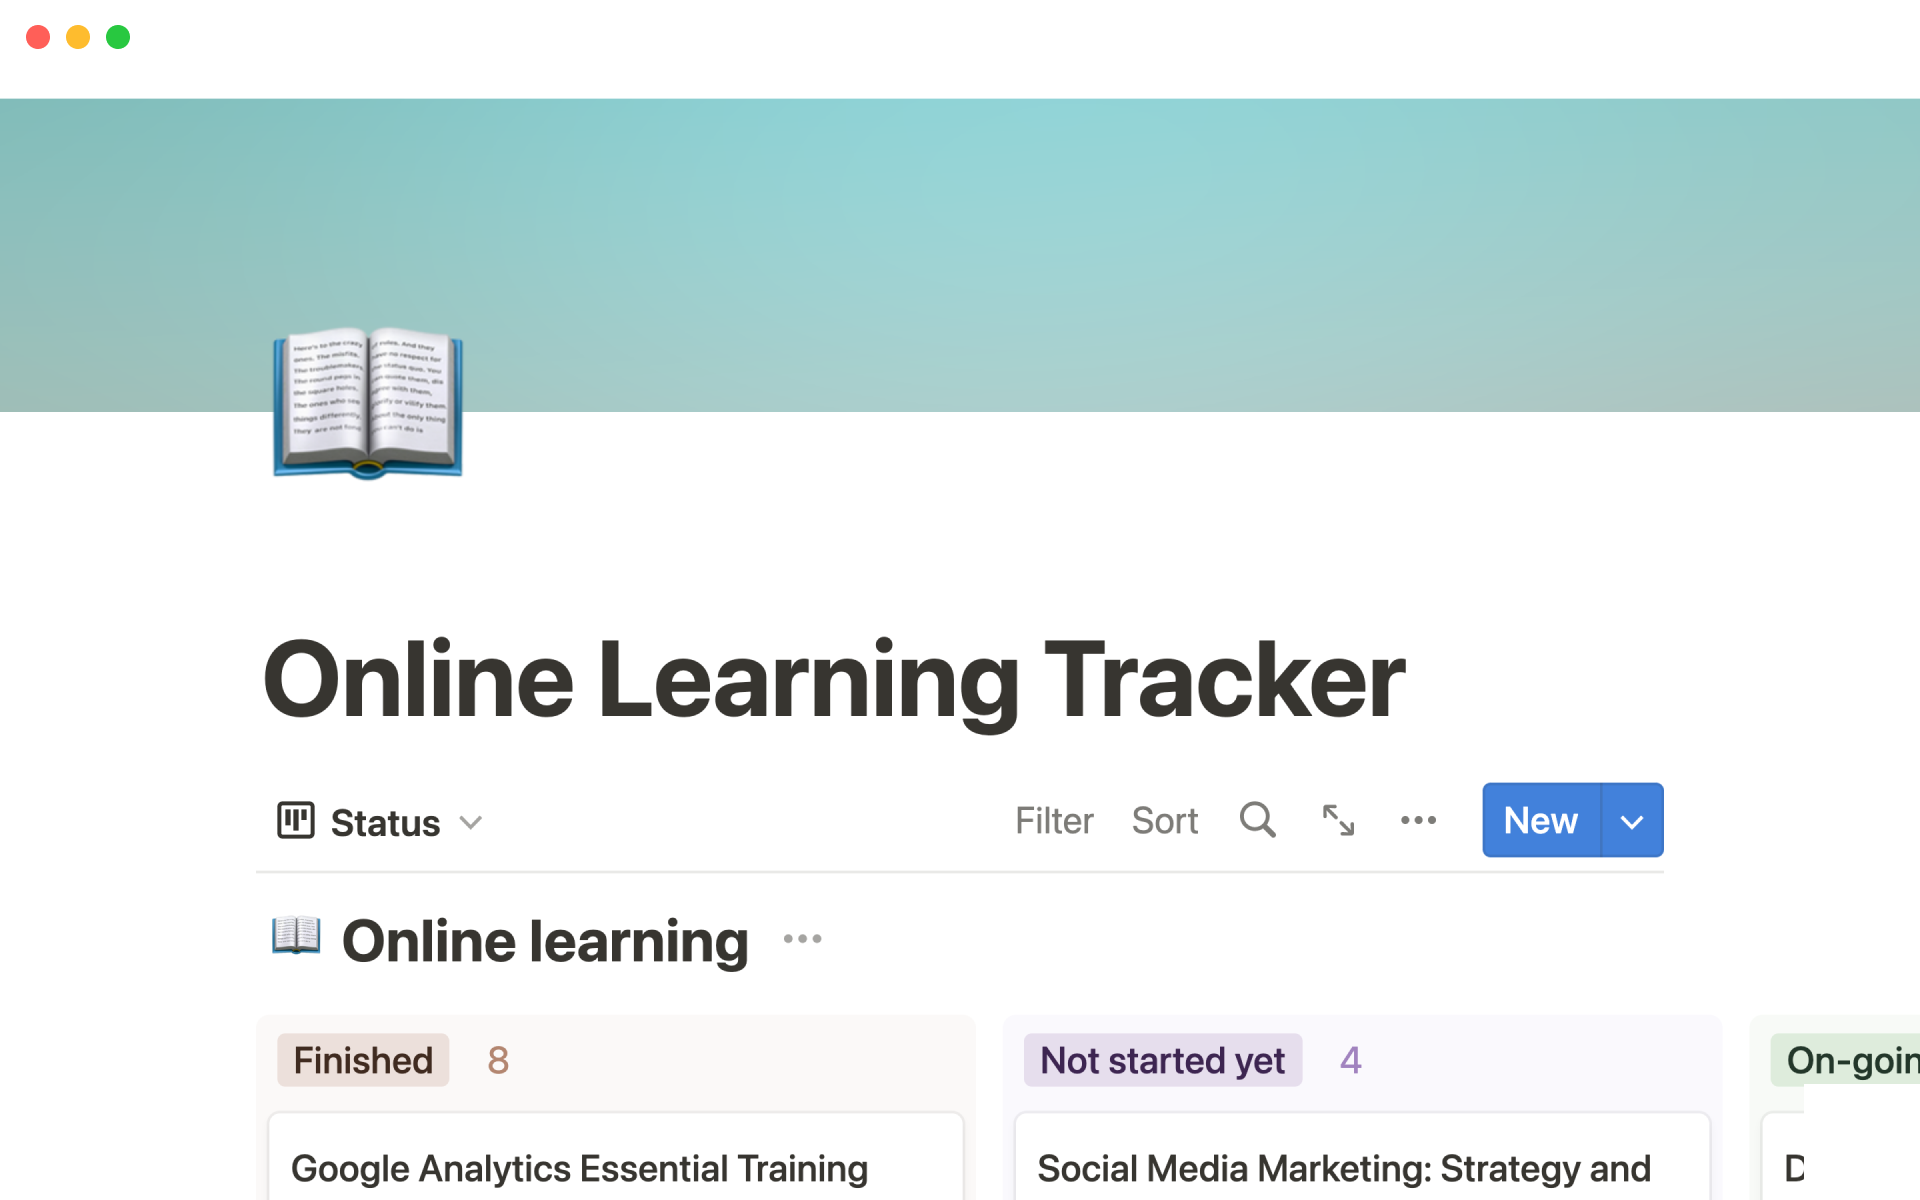 Organize and track your learning progress.